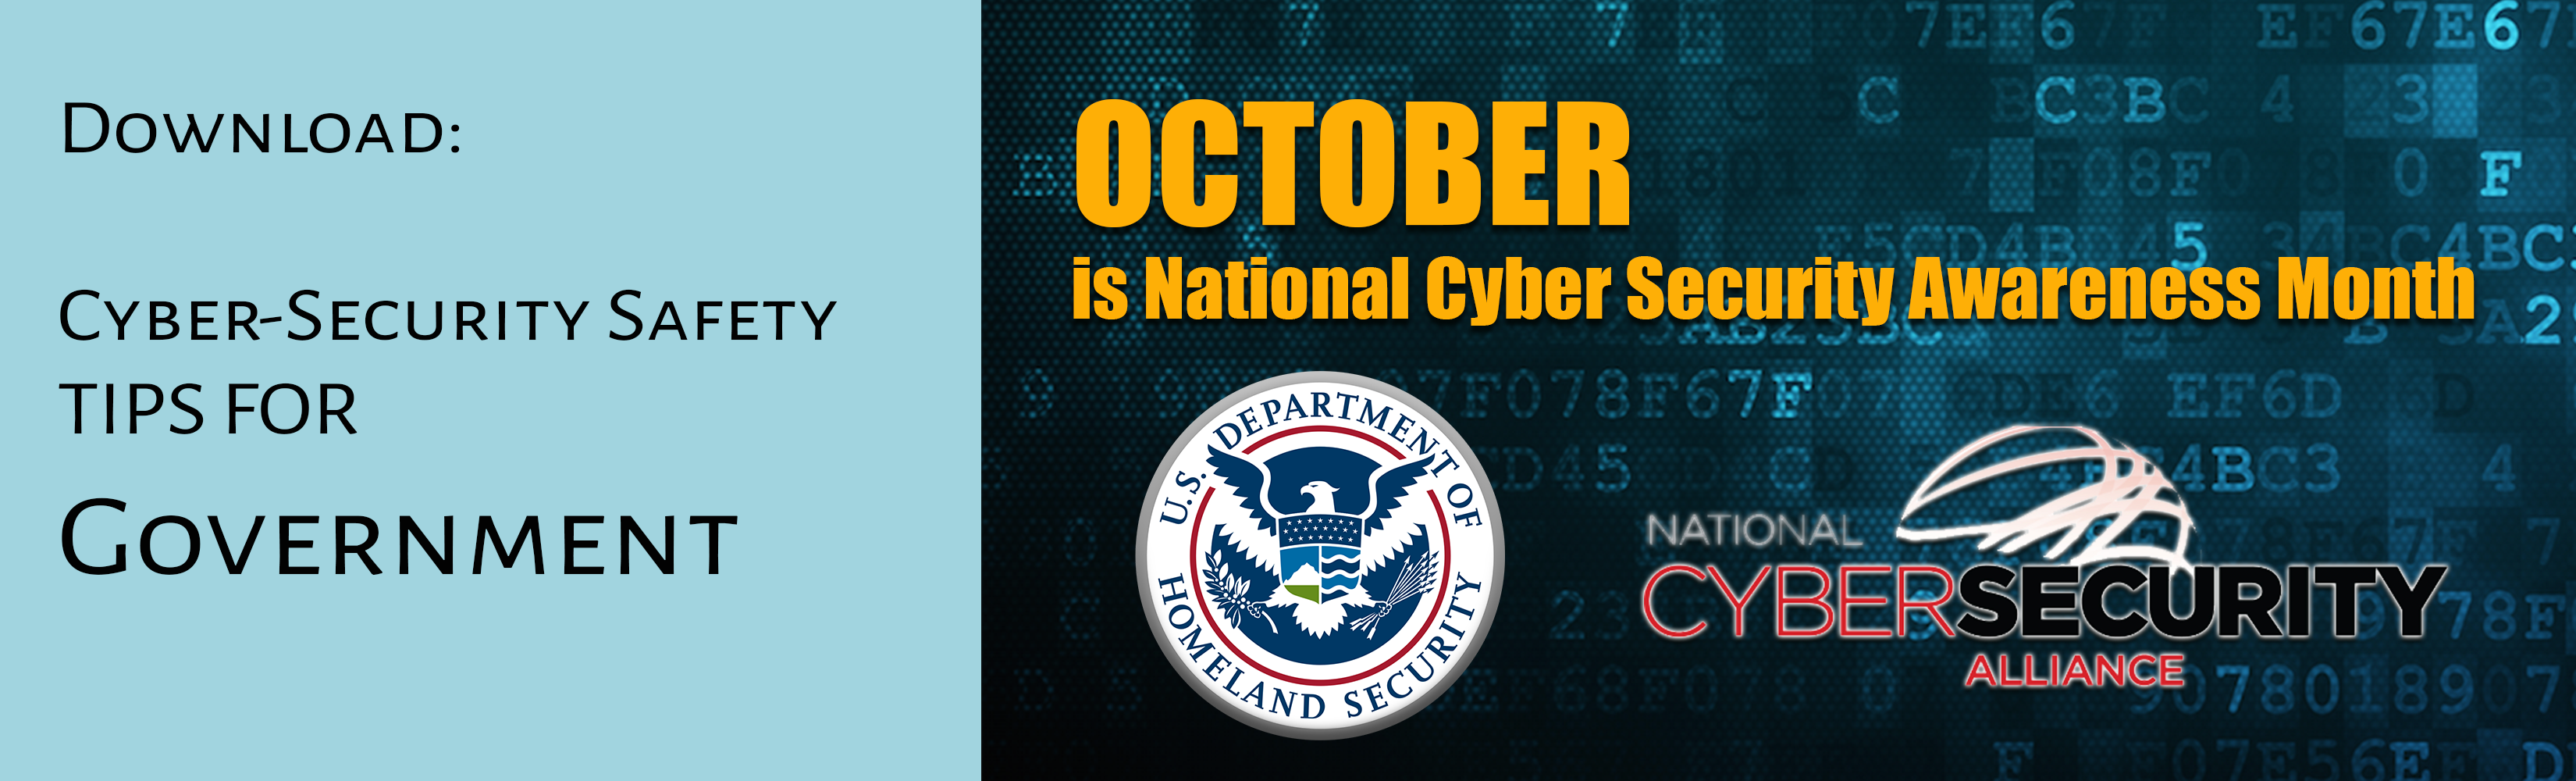 DHS_Tip Card_Government, cyber security